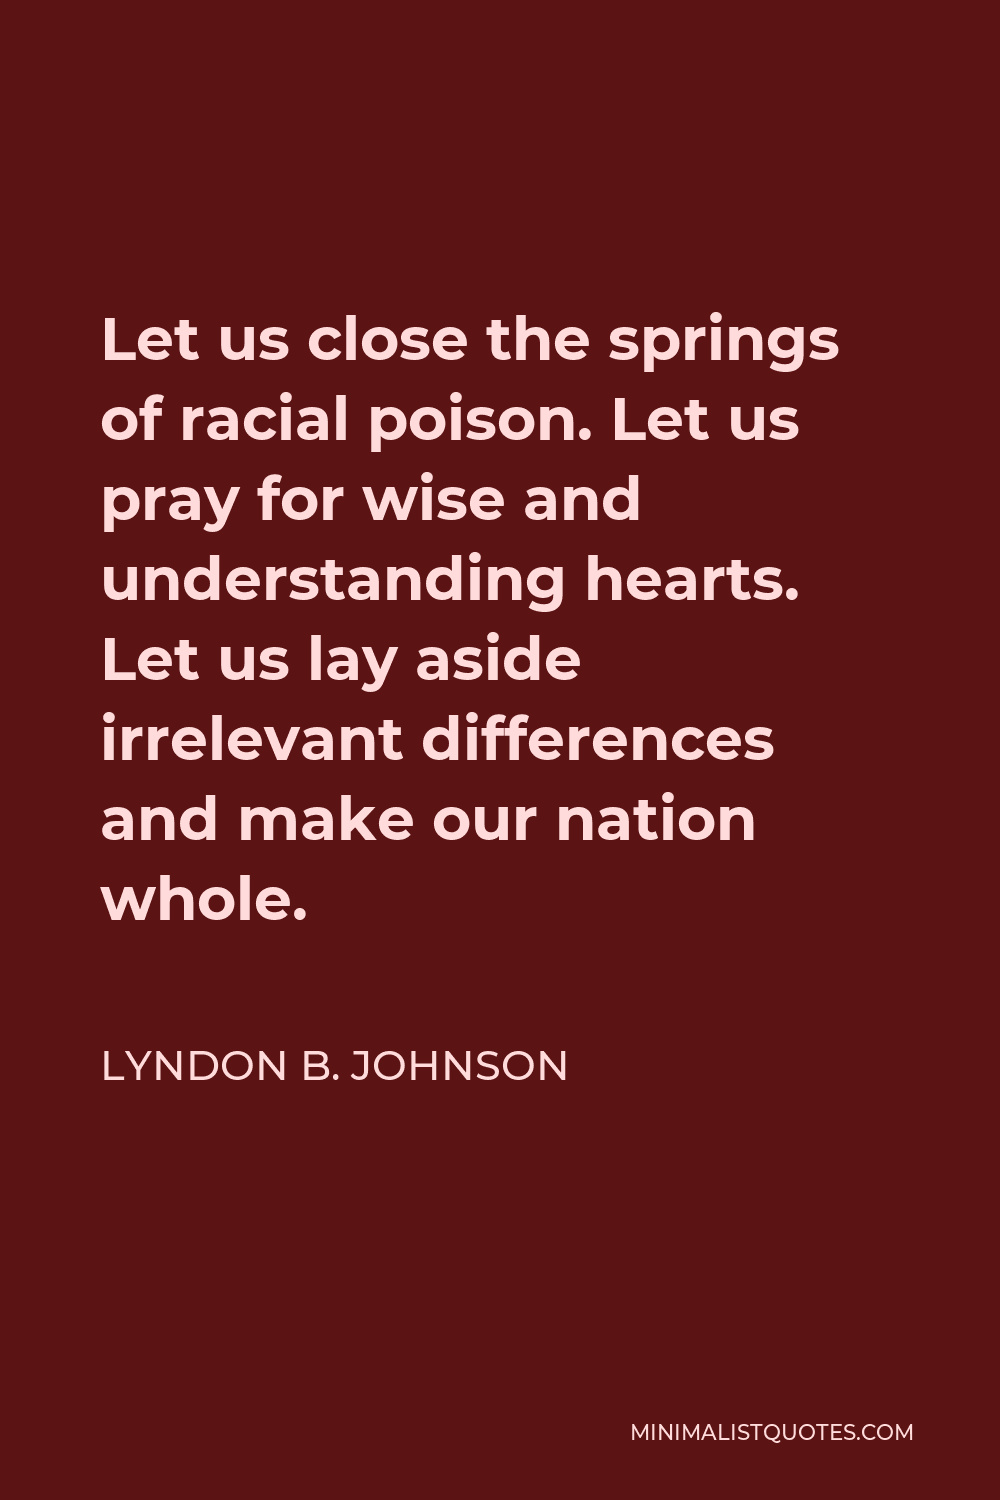 Lyndon B. Johnson Quote - Let us close the springs of racial poison. Let us pray for wise and understanding hearts. Let us lay aside irrelevant differences and make our nation whole.